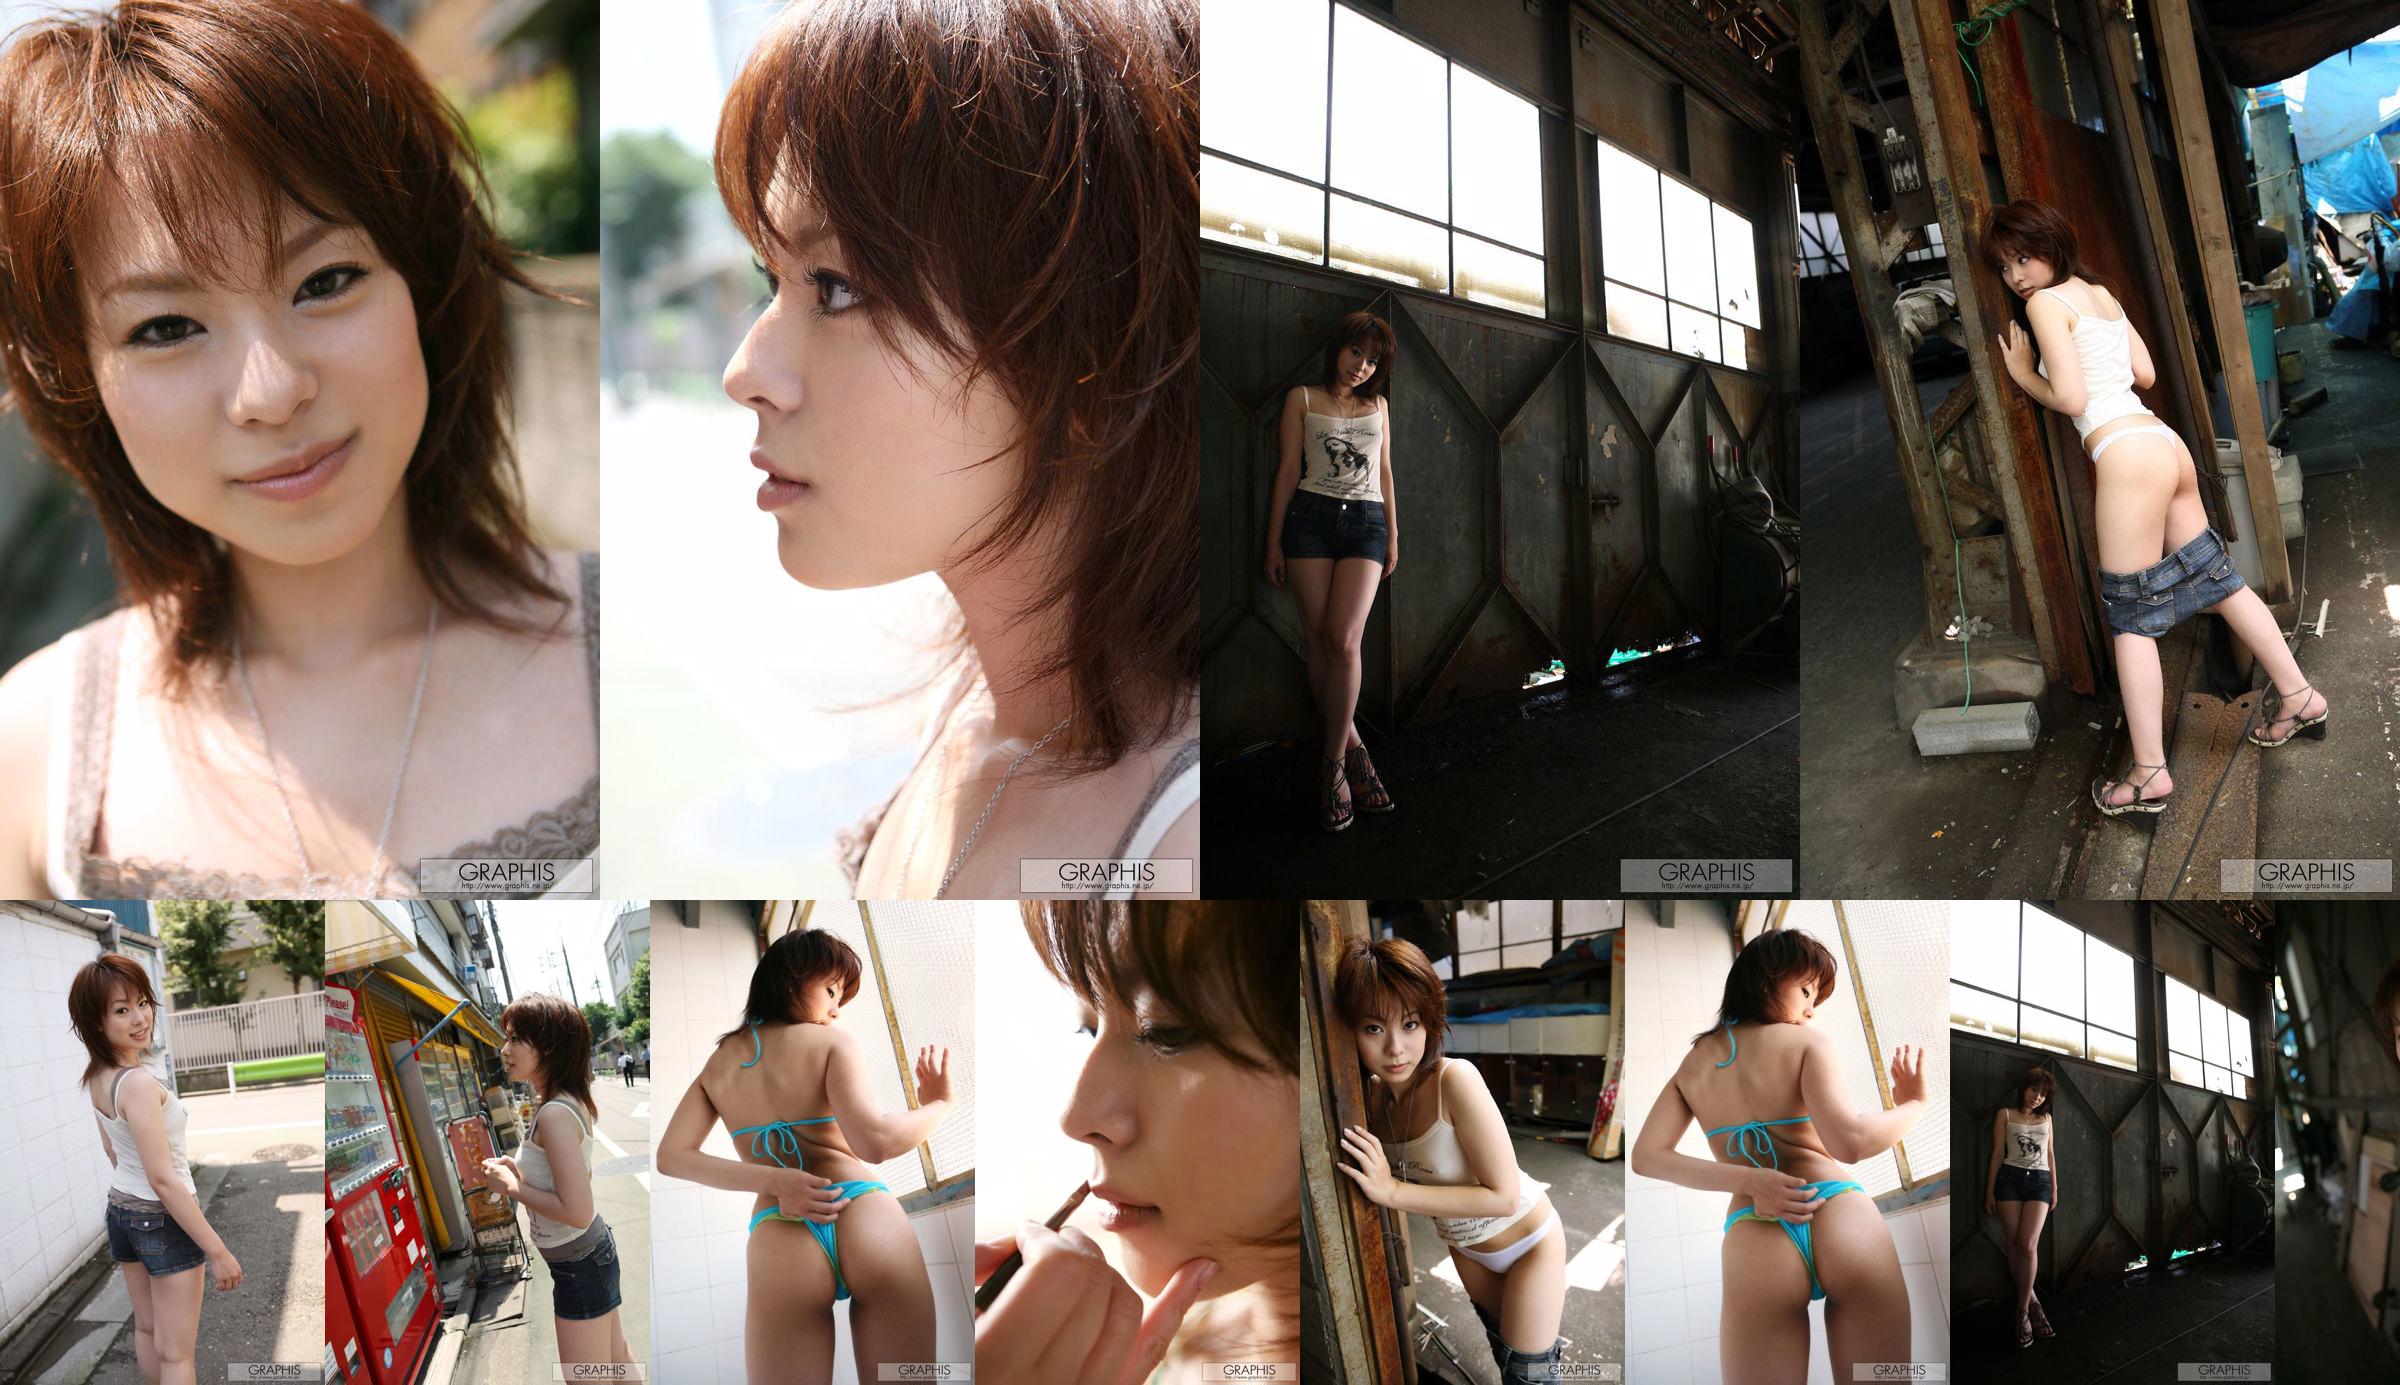 Mina Manabe Mina Manabe [Graphis] Première gravure au décollage fille No.f88eb7 Page 1